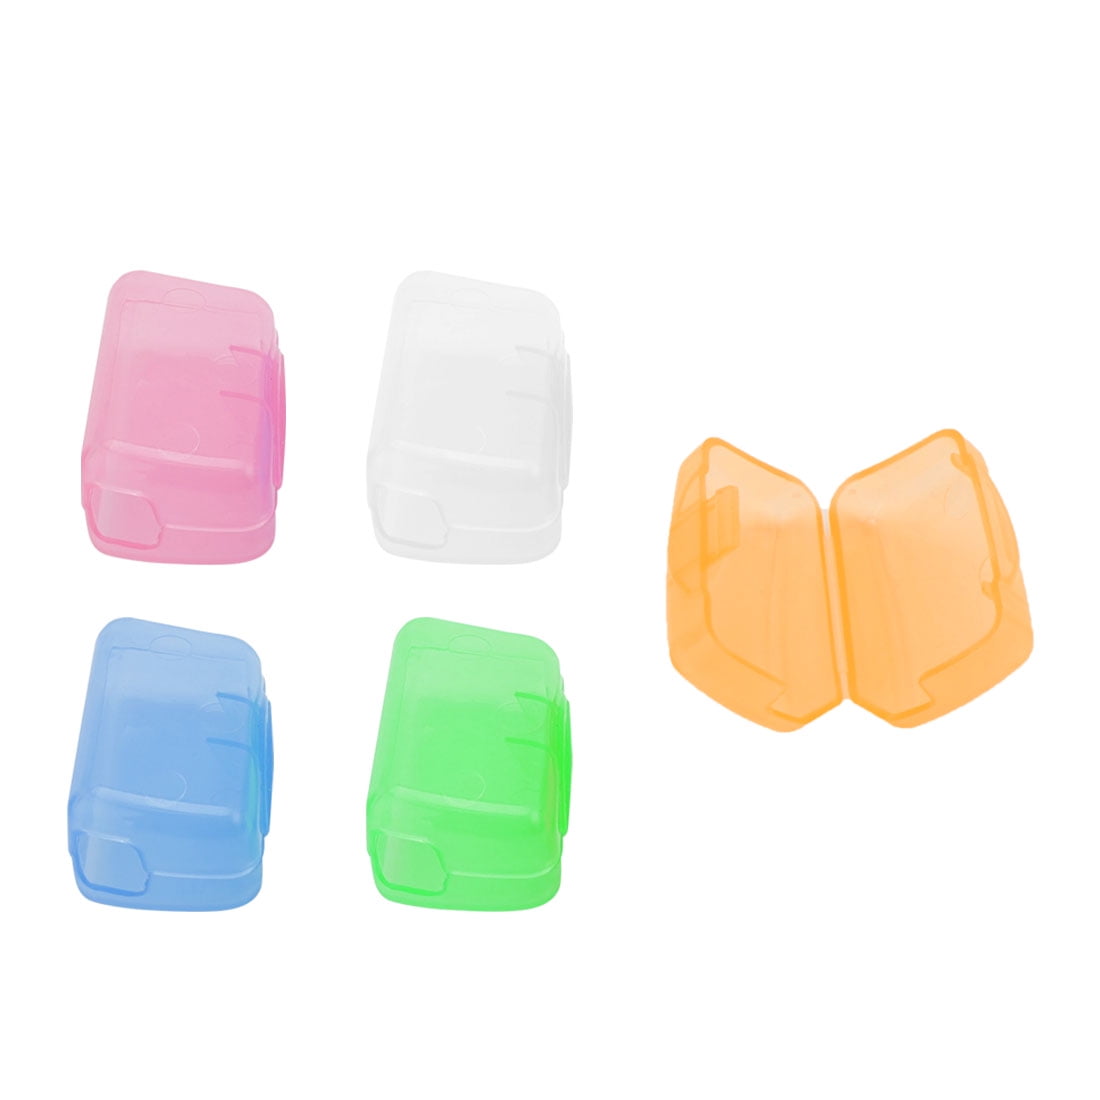 5X Toothbrush Head Cover Case Cap Holder for Travel Clean Plastic Outdoor Kit ca 